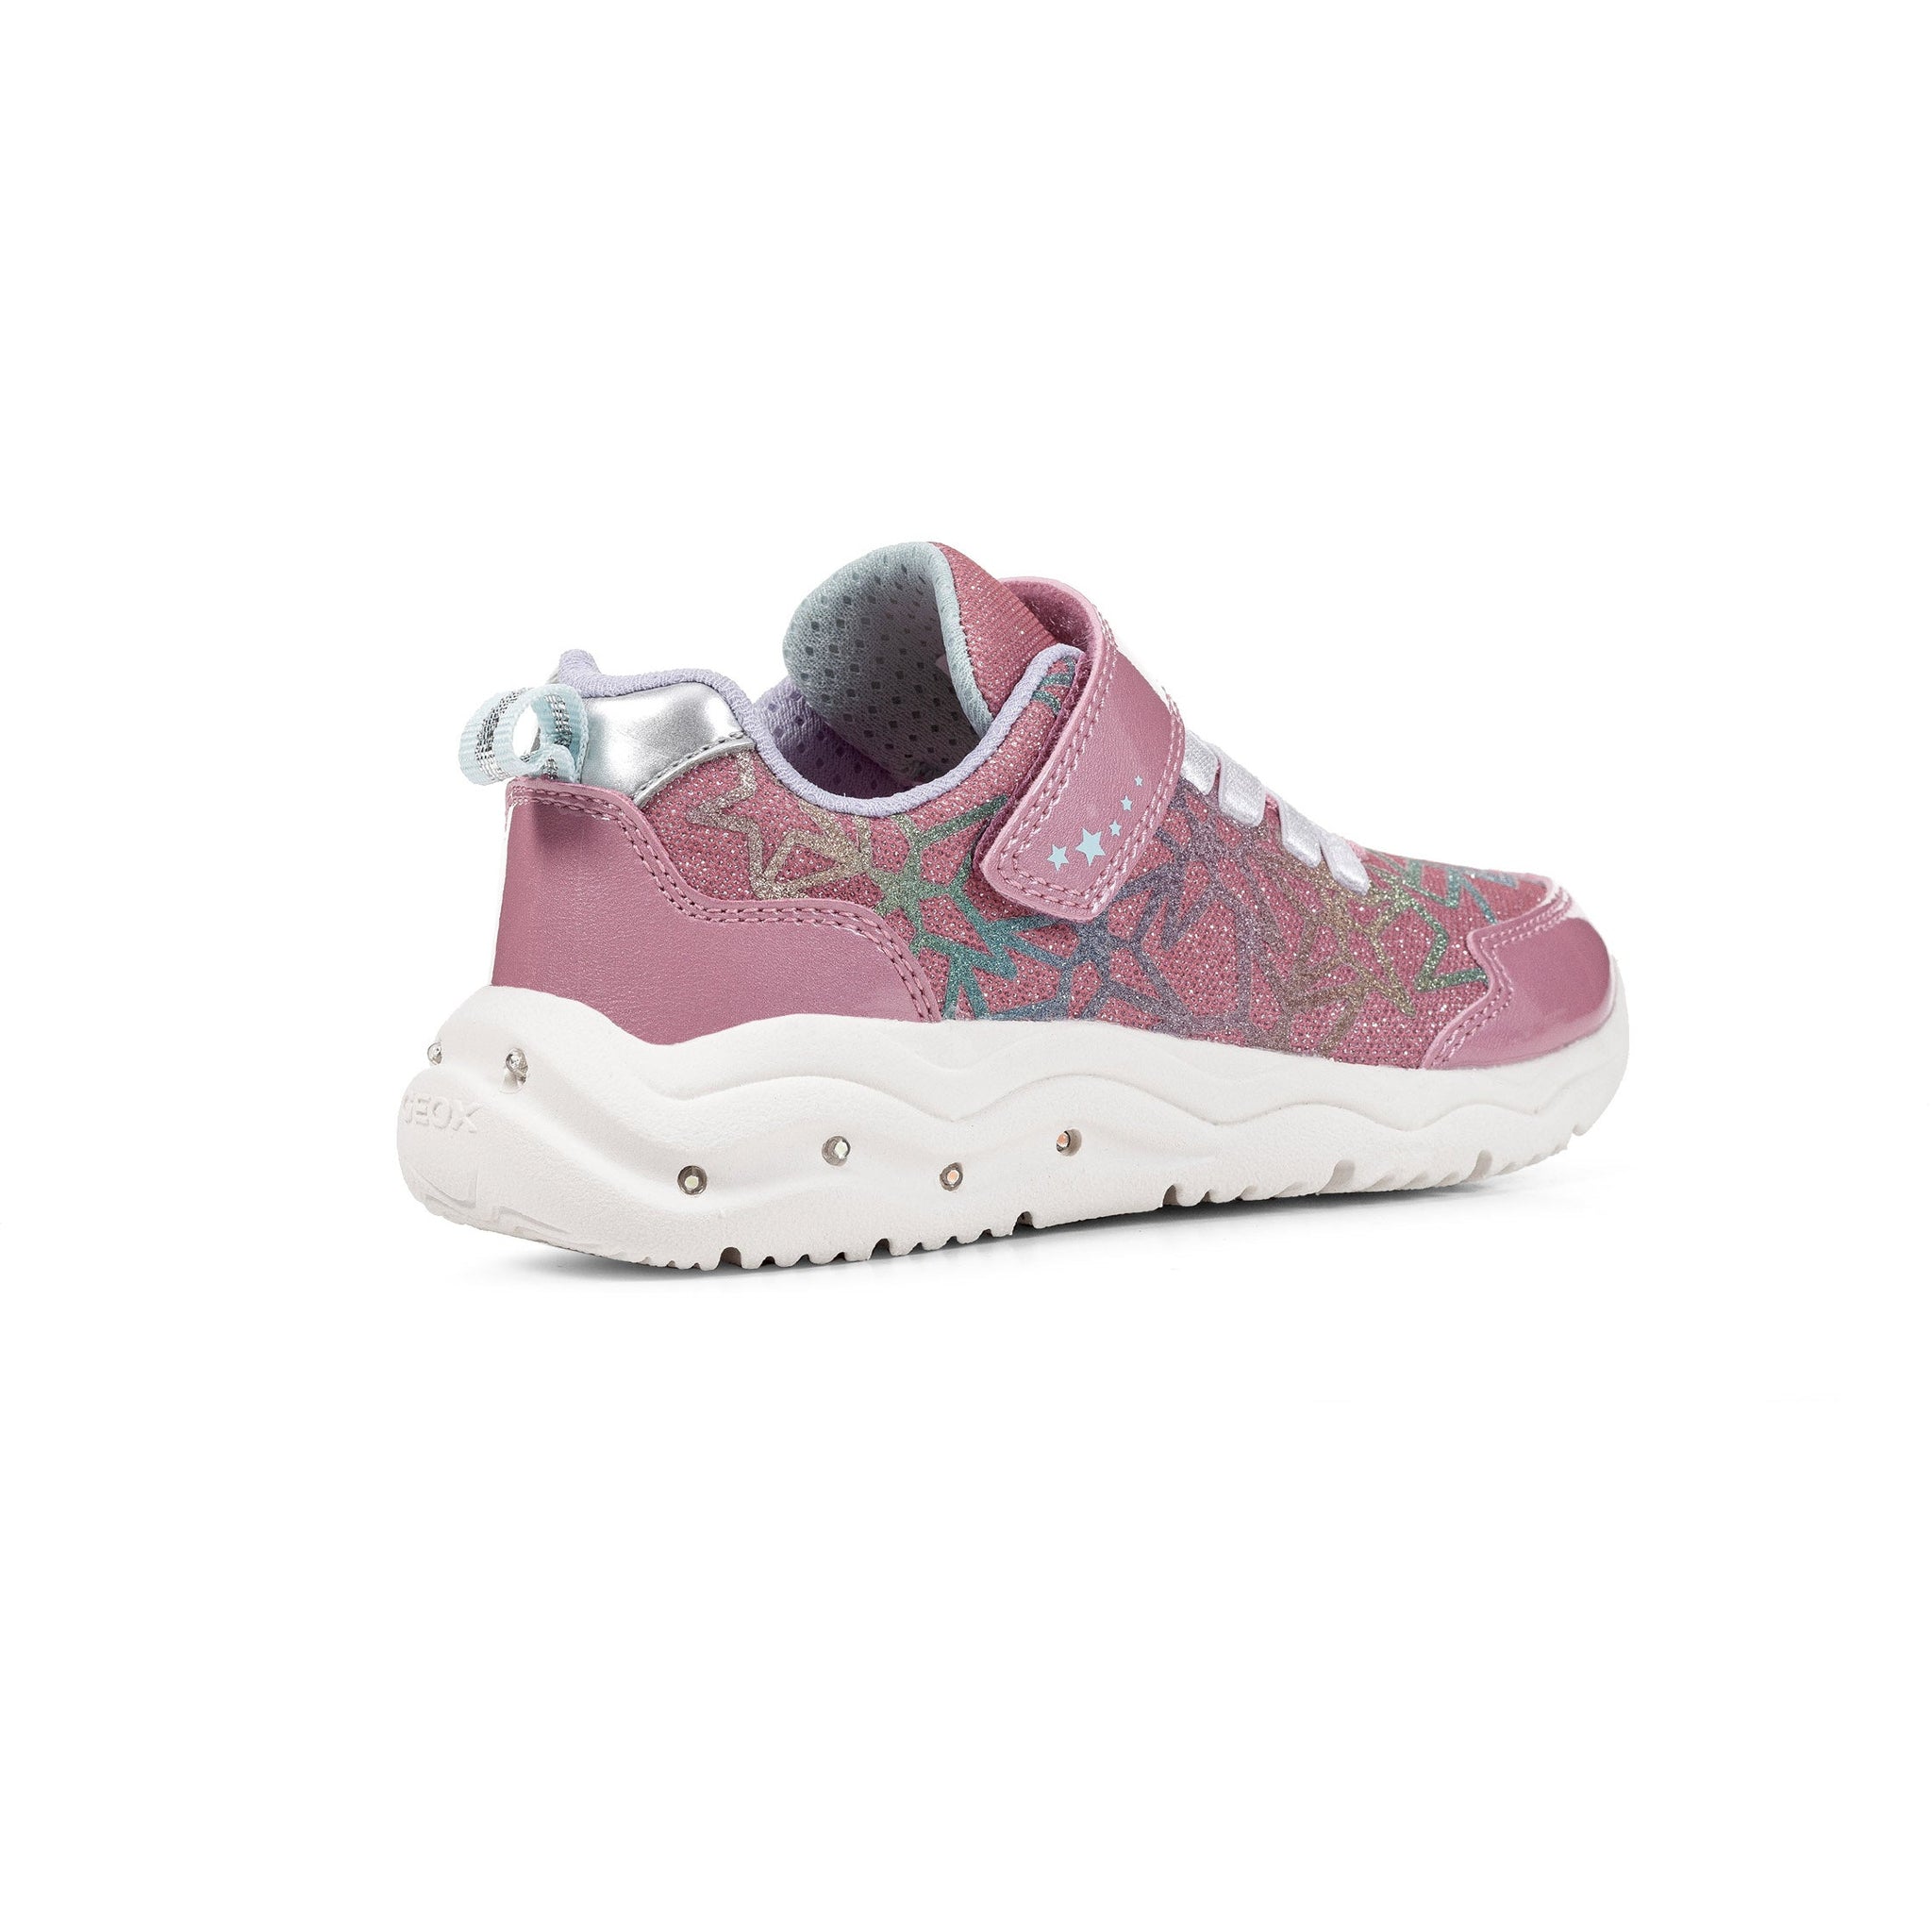 GEOX Phyper(J35GUA) - Girls Light Up Trainer in Fuchsia Multi.  Geox Shoes | Childrens Shoe Fitting | Wisemans | Bantry | West Cork | Ireland